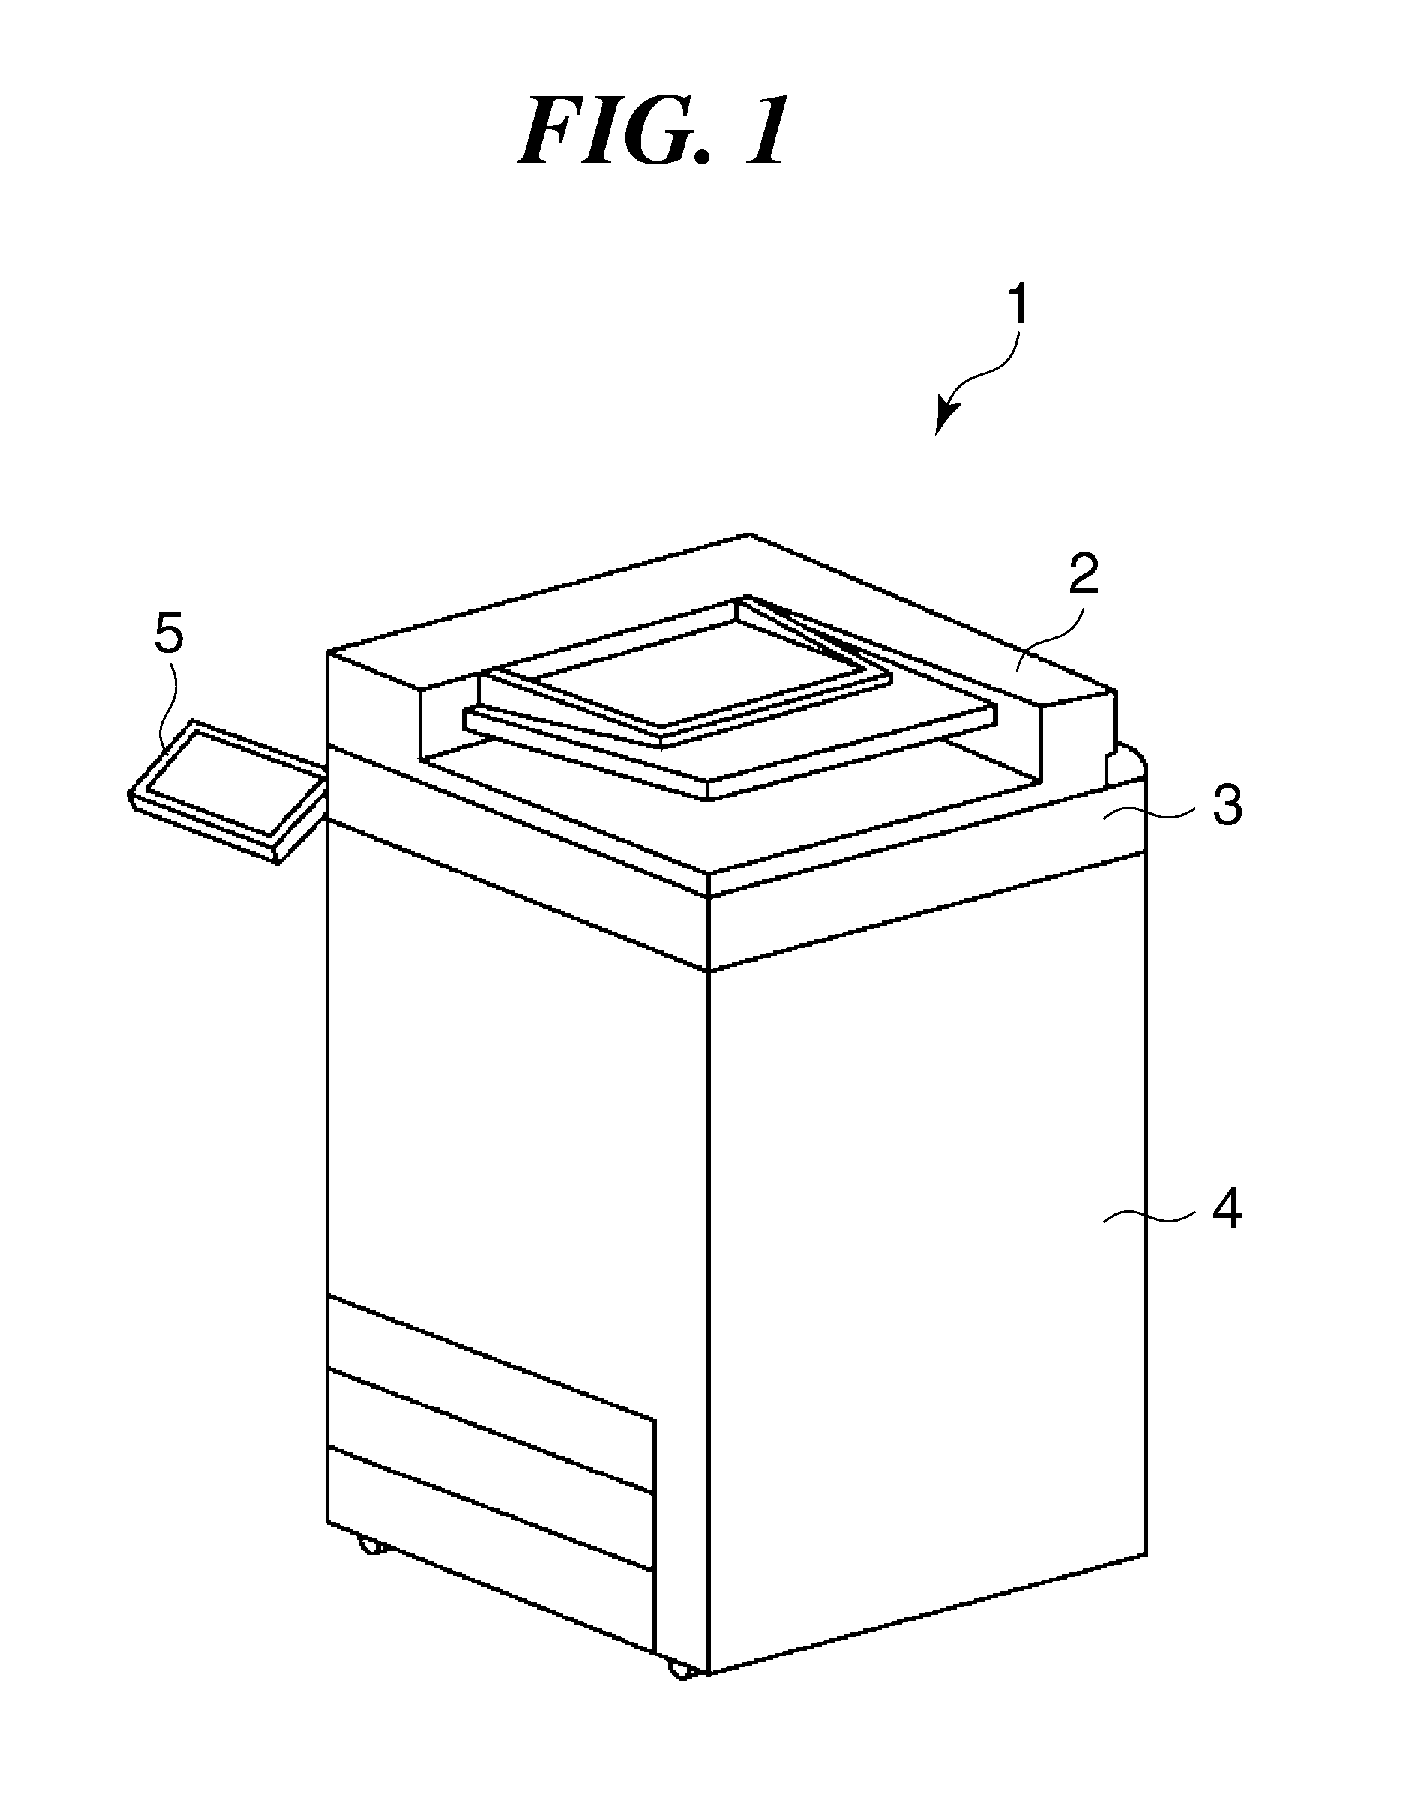 Image forming apparatus, control method therefor, and storage medium storing control program therefor